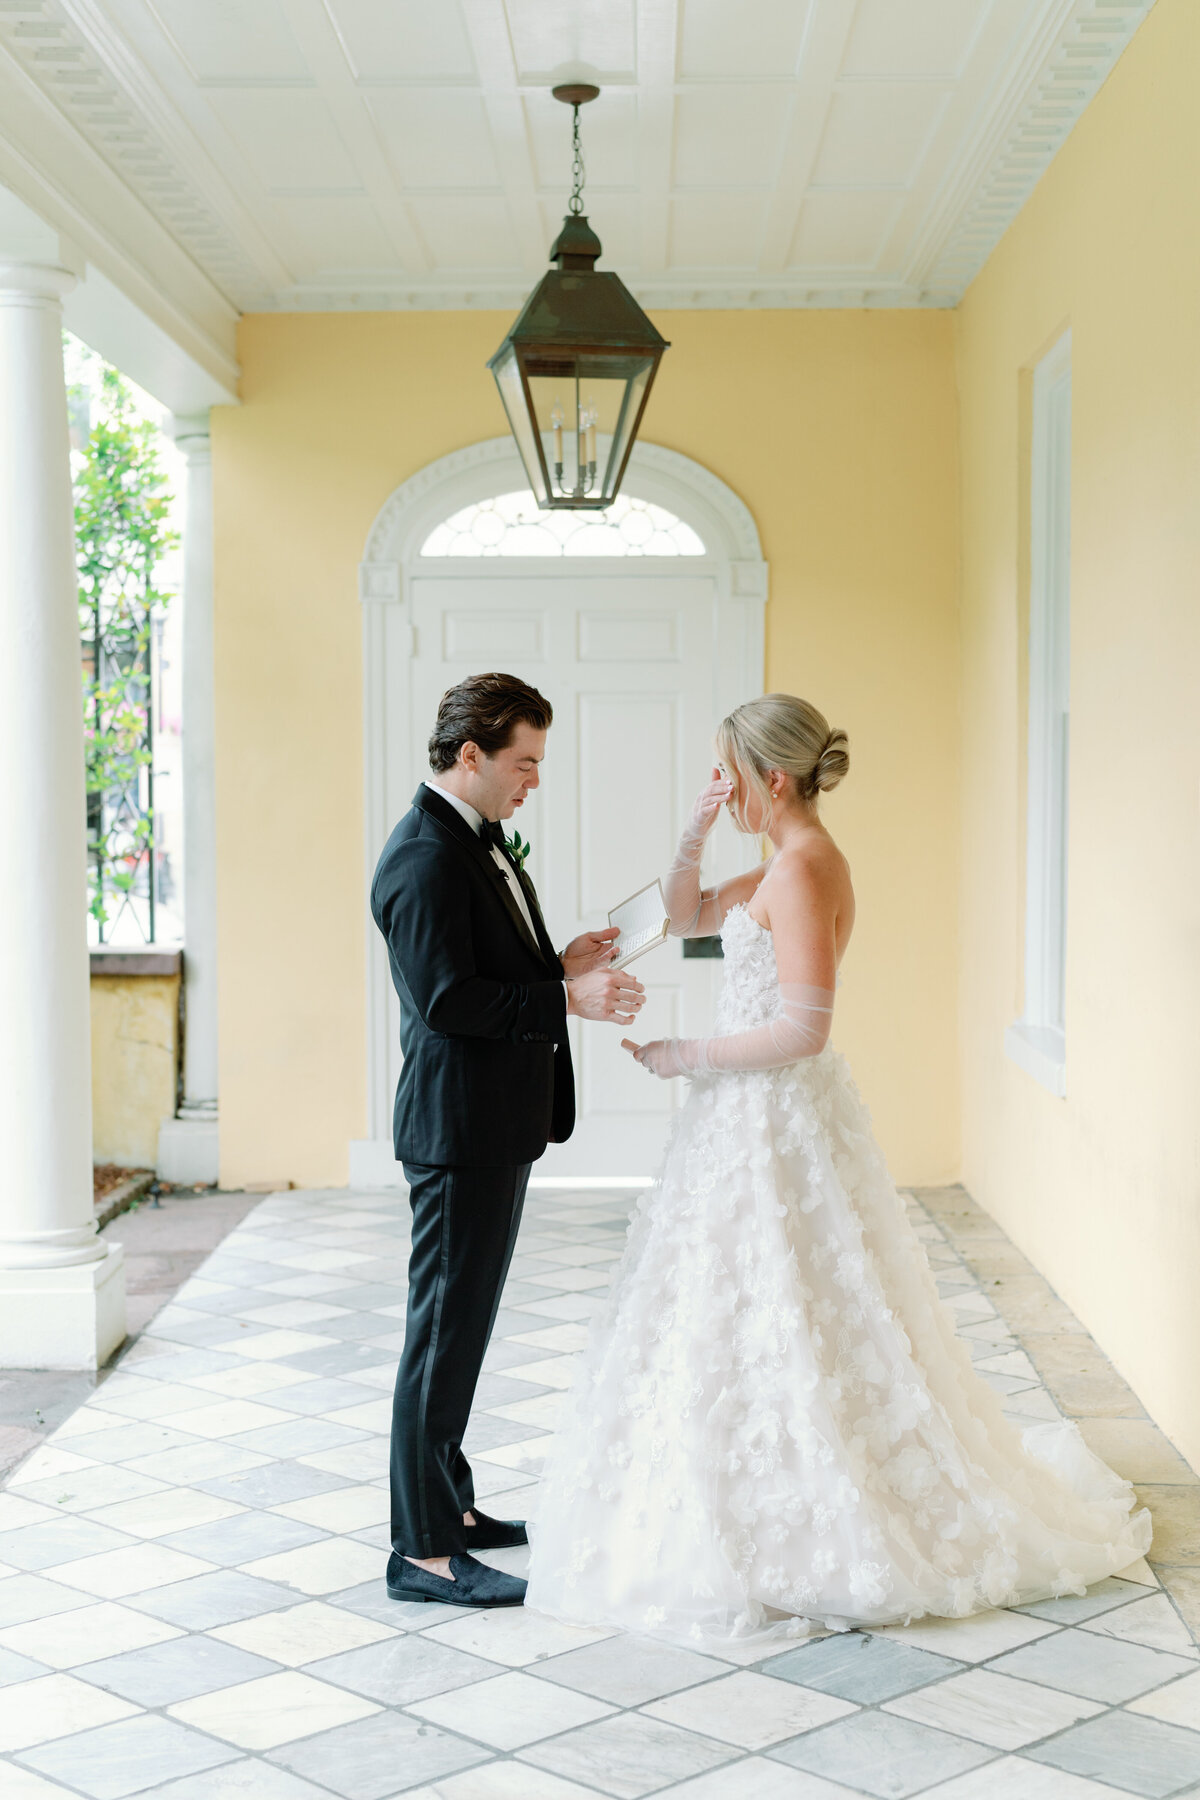 Emotional private vow reading at the piazza of William Aiken House. Marble checkered floors and gas lantern at historic Charleston wedding venue with yellow walls. Charleston wedding photographer.